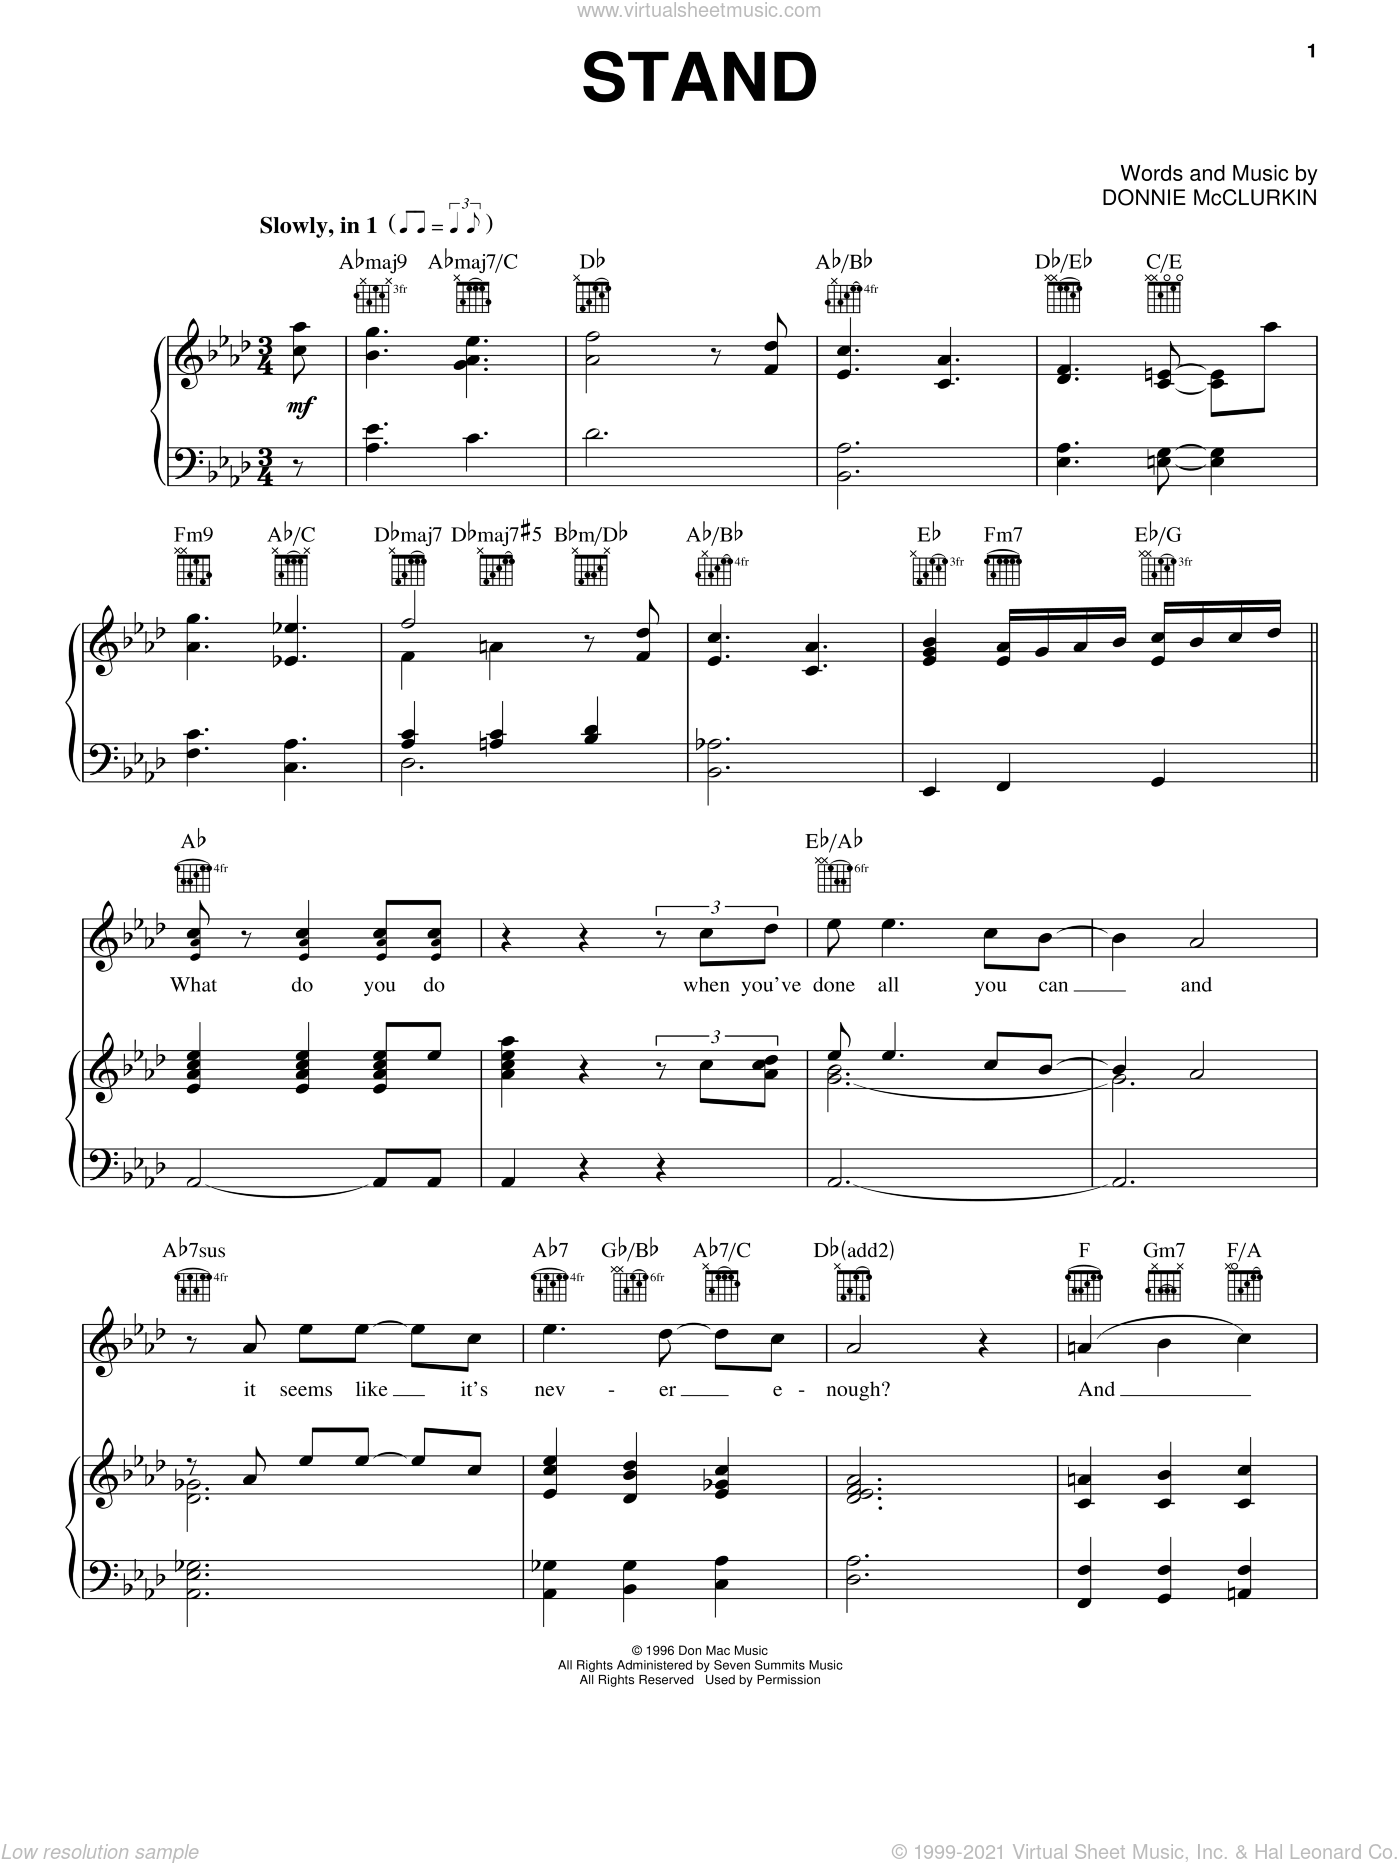 Free sheet music preview of Stand for voice, piano or guitar by Donnie McCl...